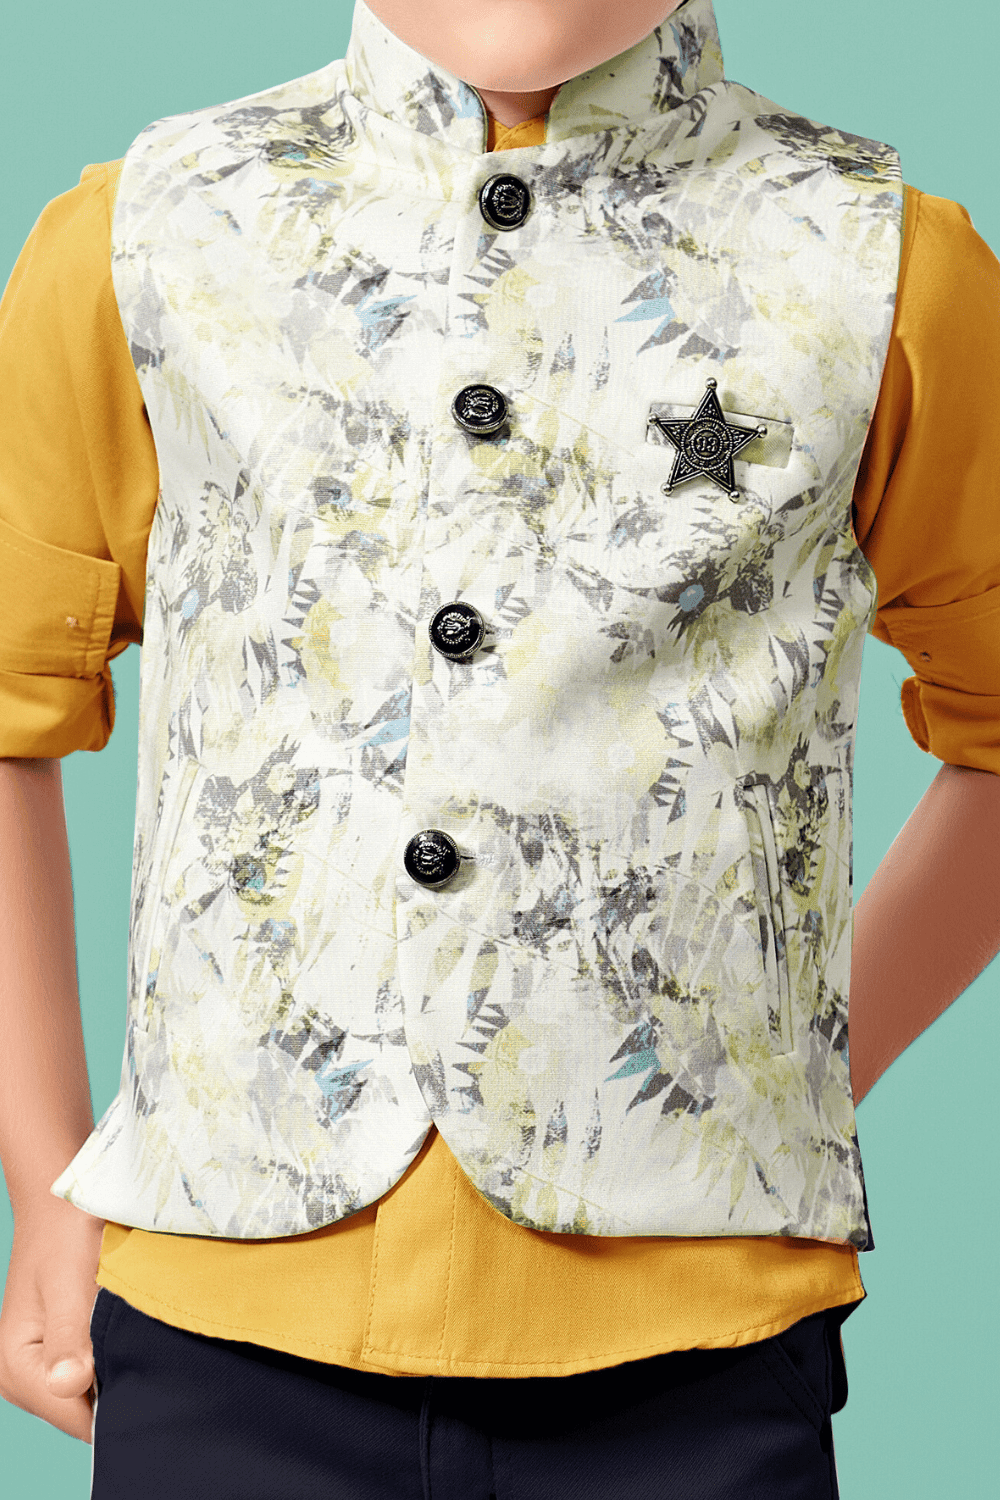 Gold and Cream Printed Waist Coat and Navy Blue Pant Set for Boys with Belt - Seasons Chennai